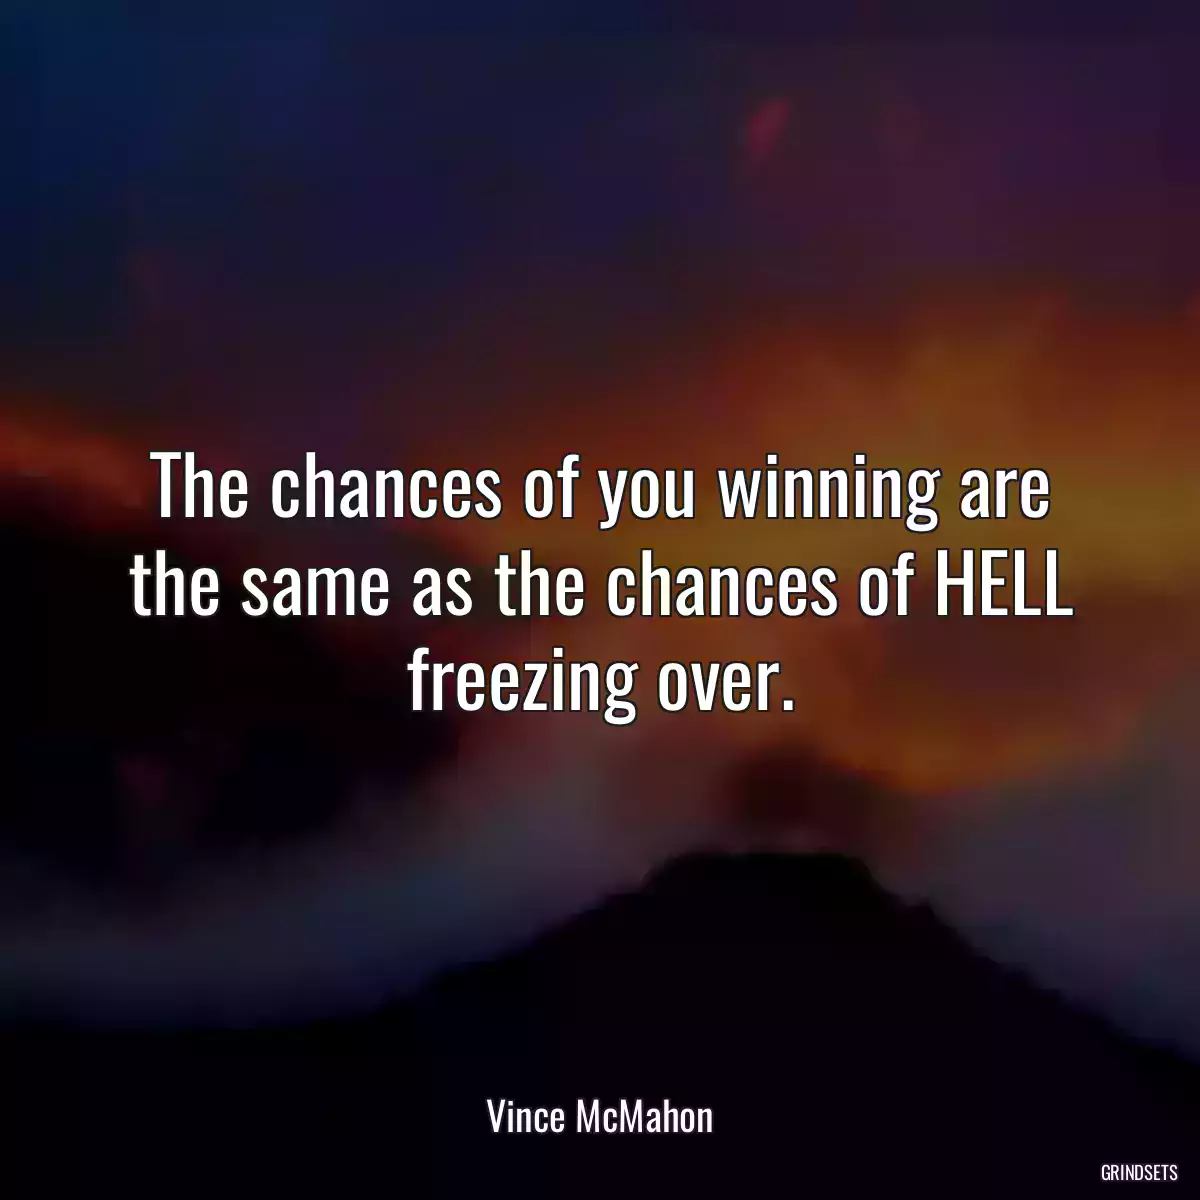 The chances of you winning are the same as the chances of HELL freezing over.